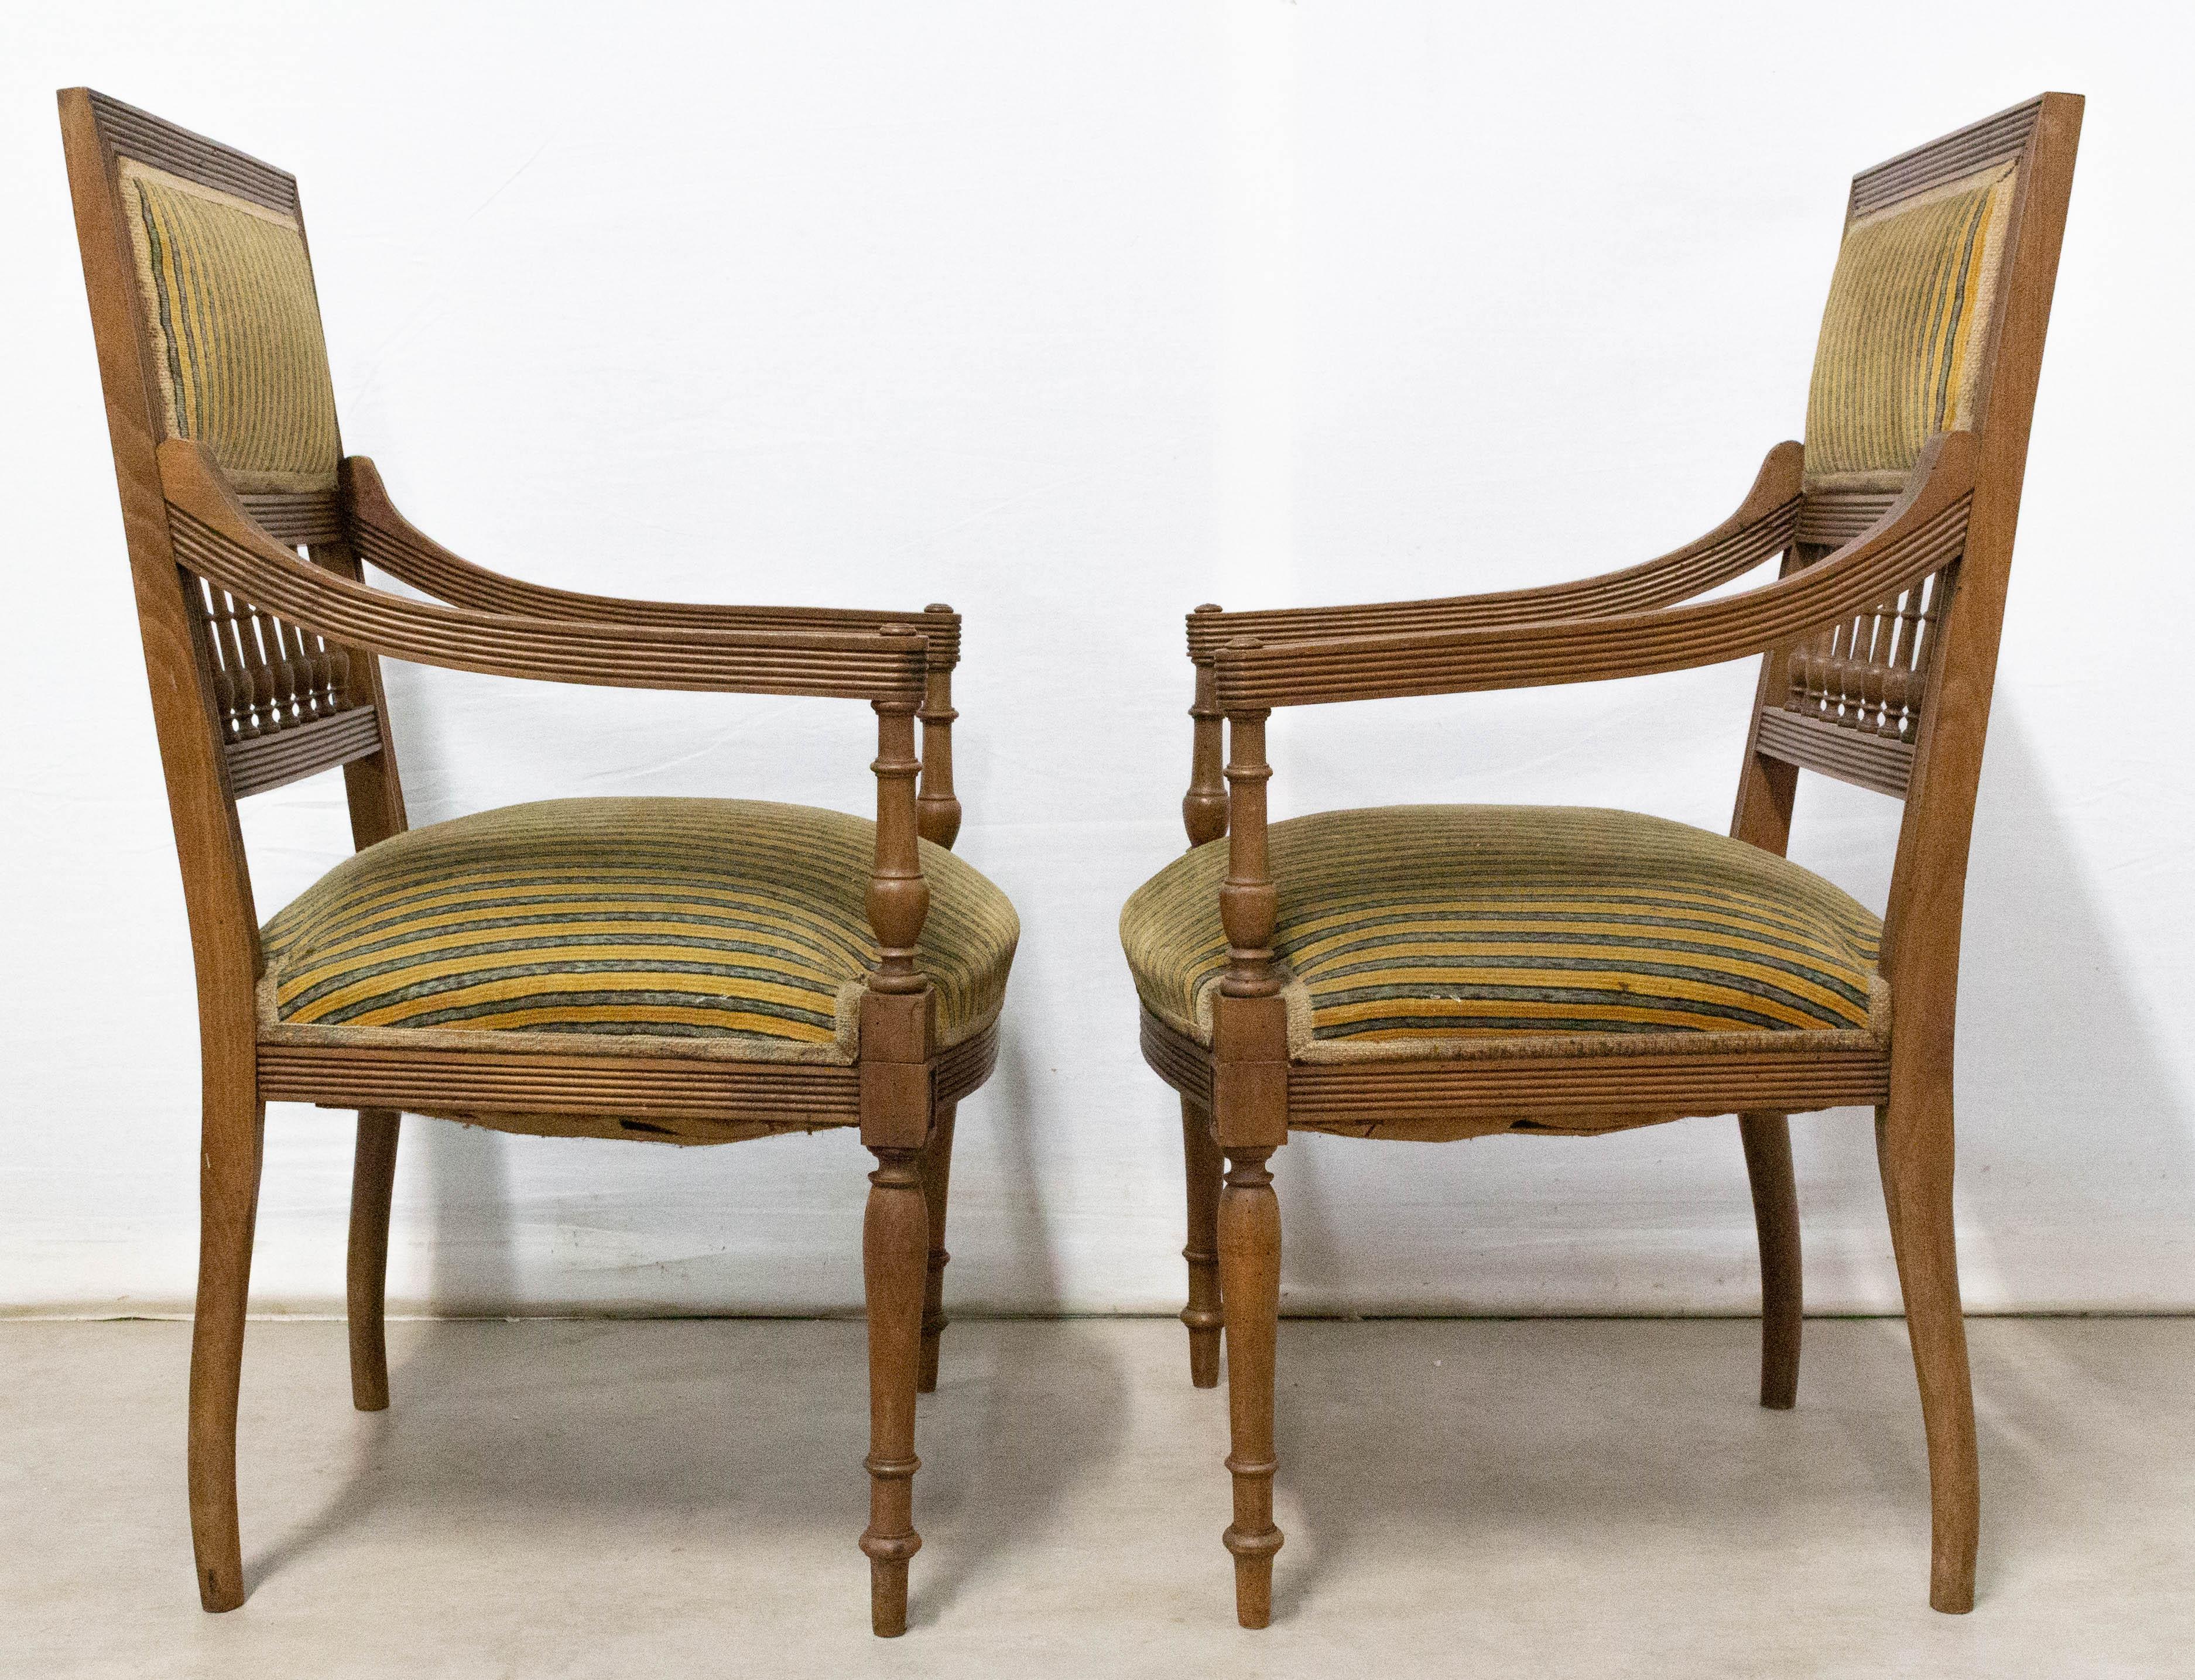 Empire Pair of Louis XVI Revival Armchairs French, Early 20th Century